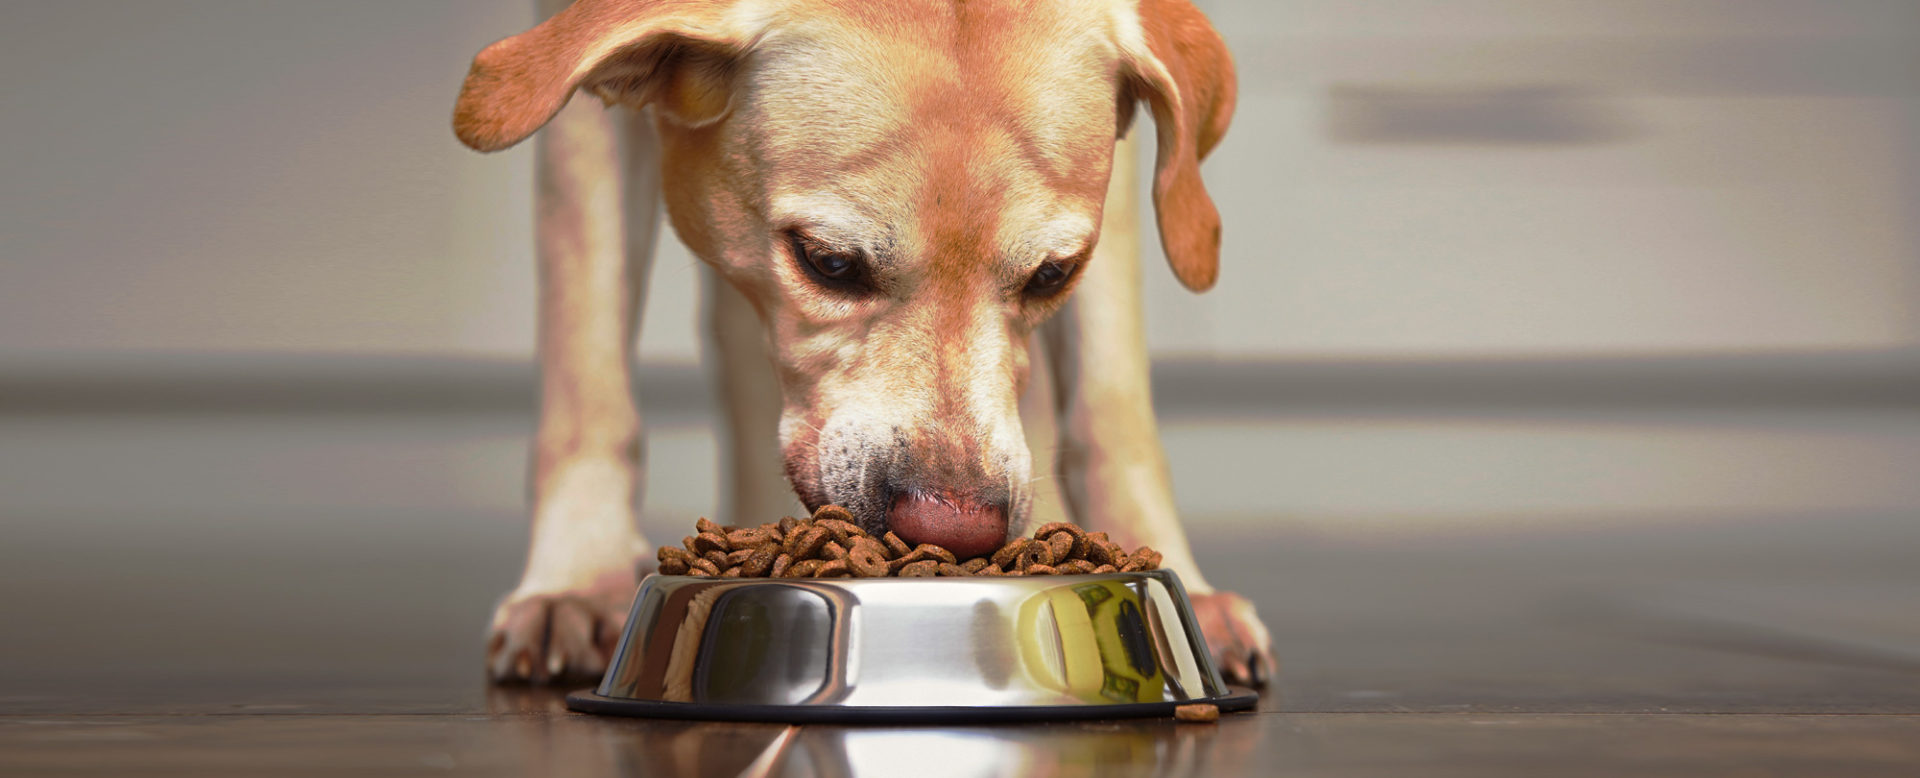 Choosing the Right Dog Food